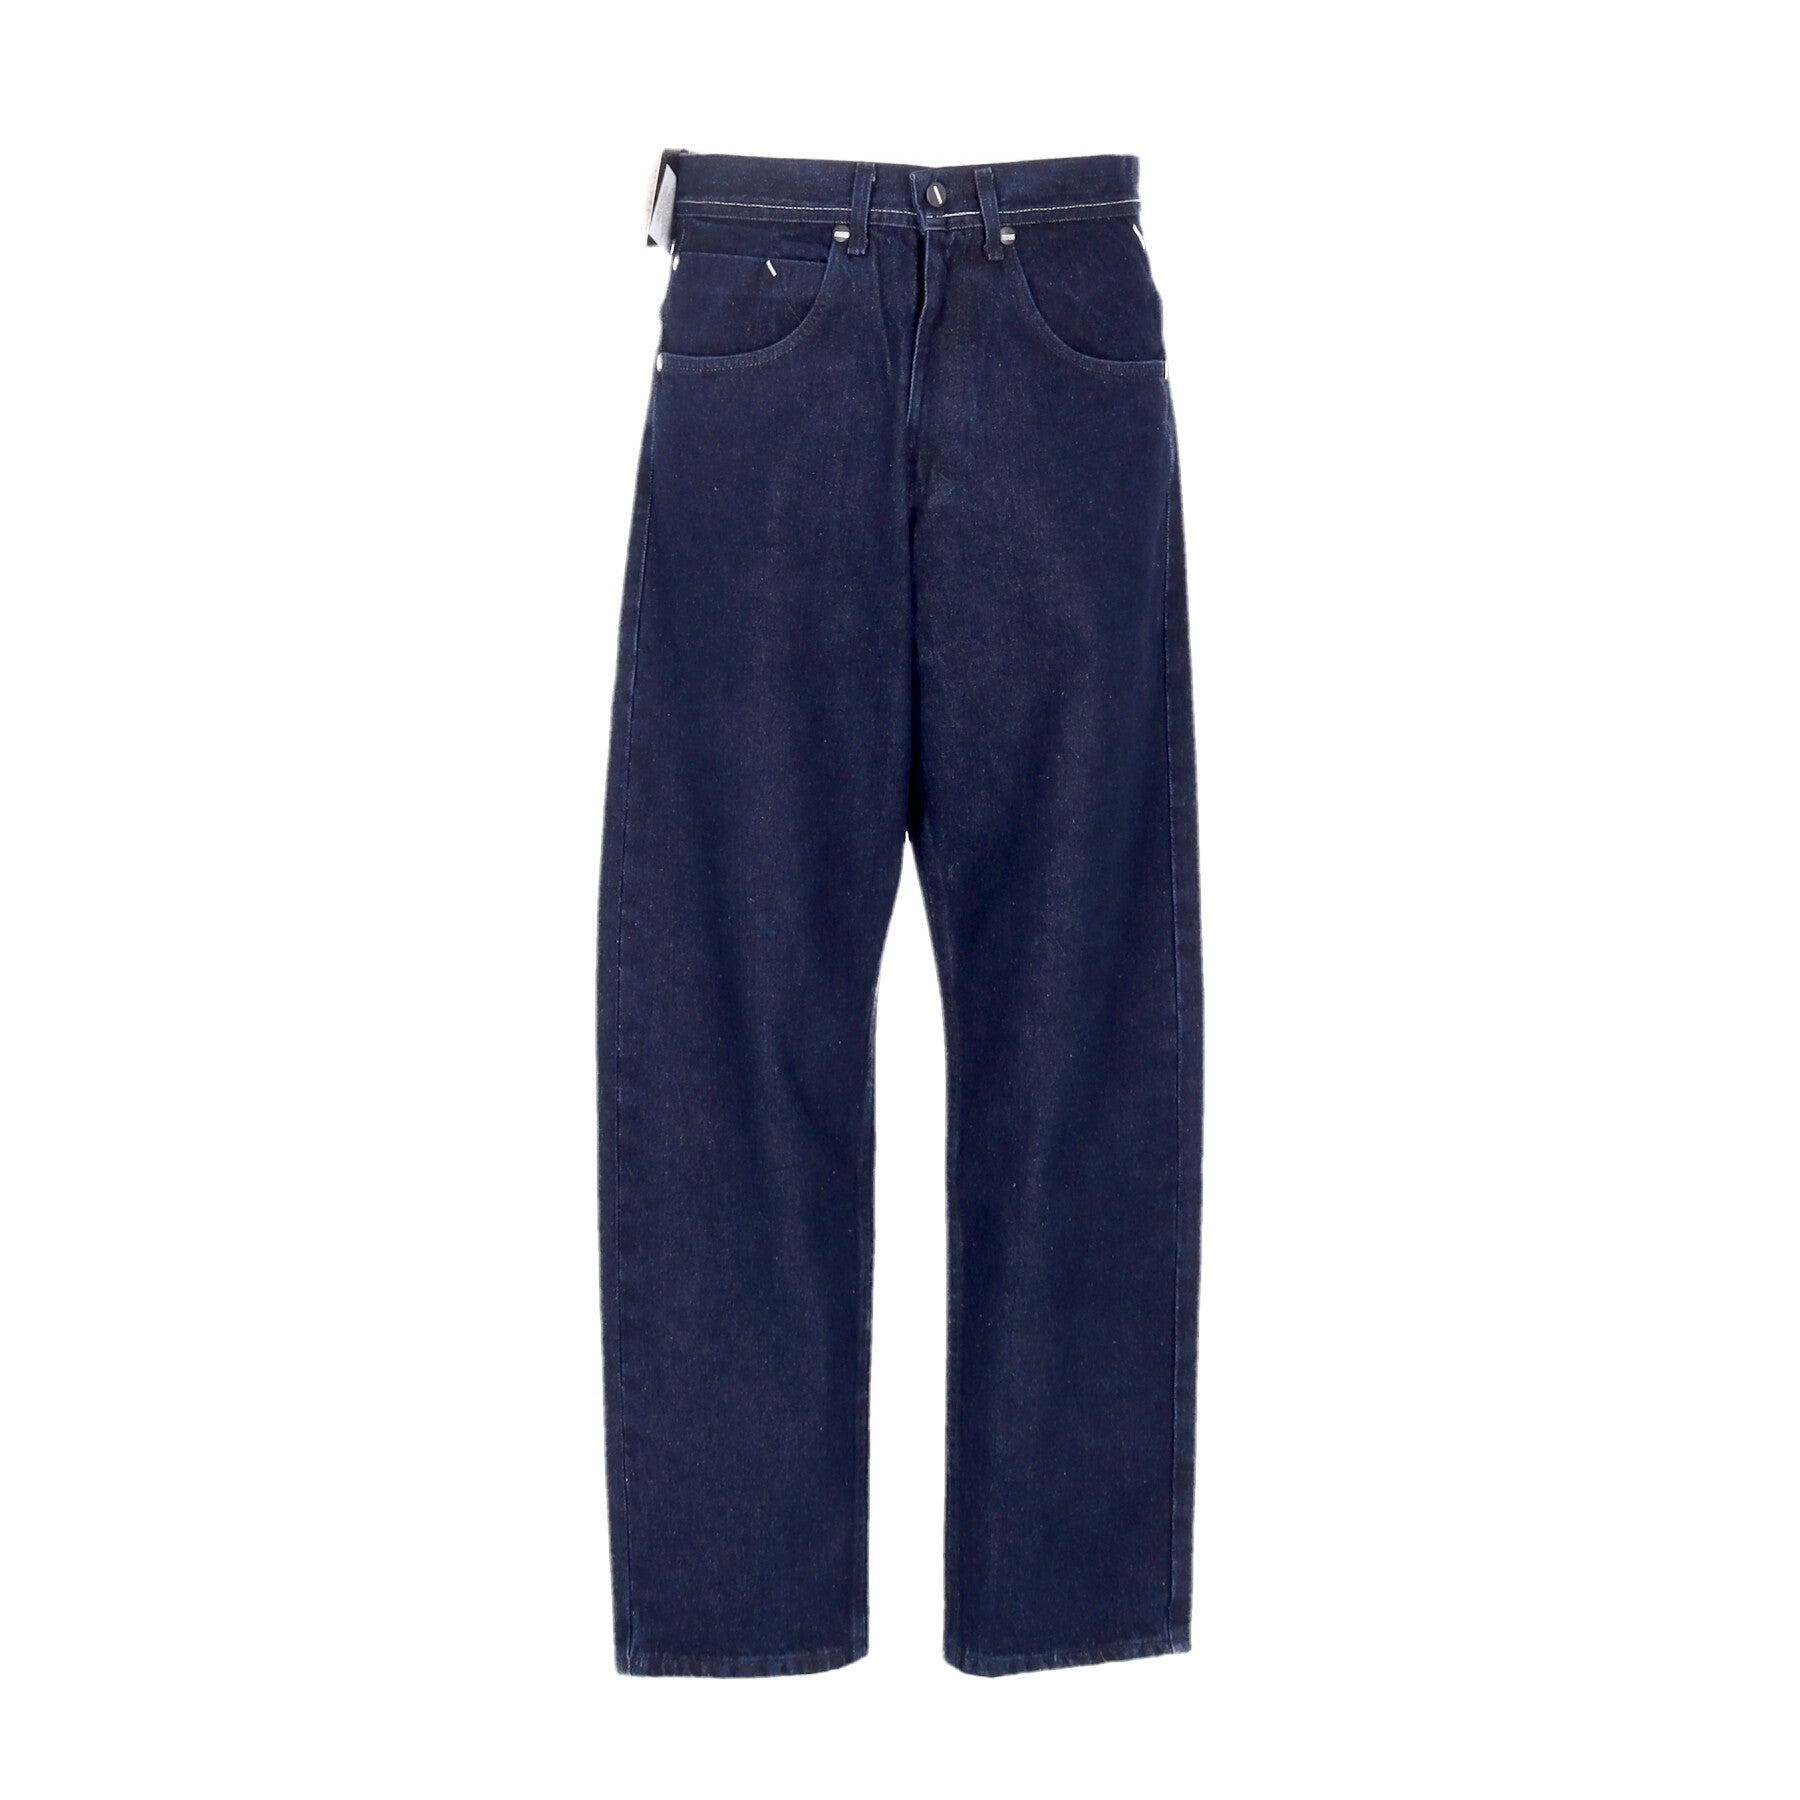 Jeans Uomo Craft Baggy Jeans Rinse Rinse